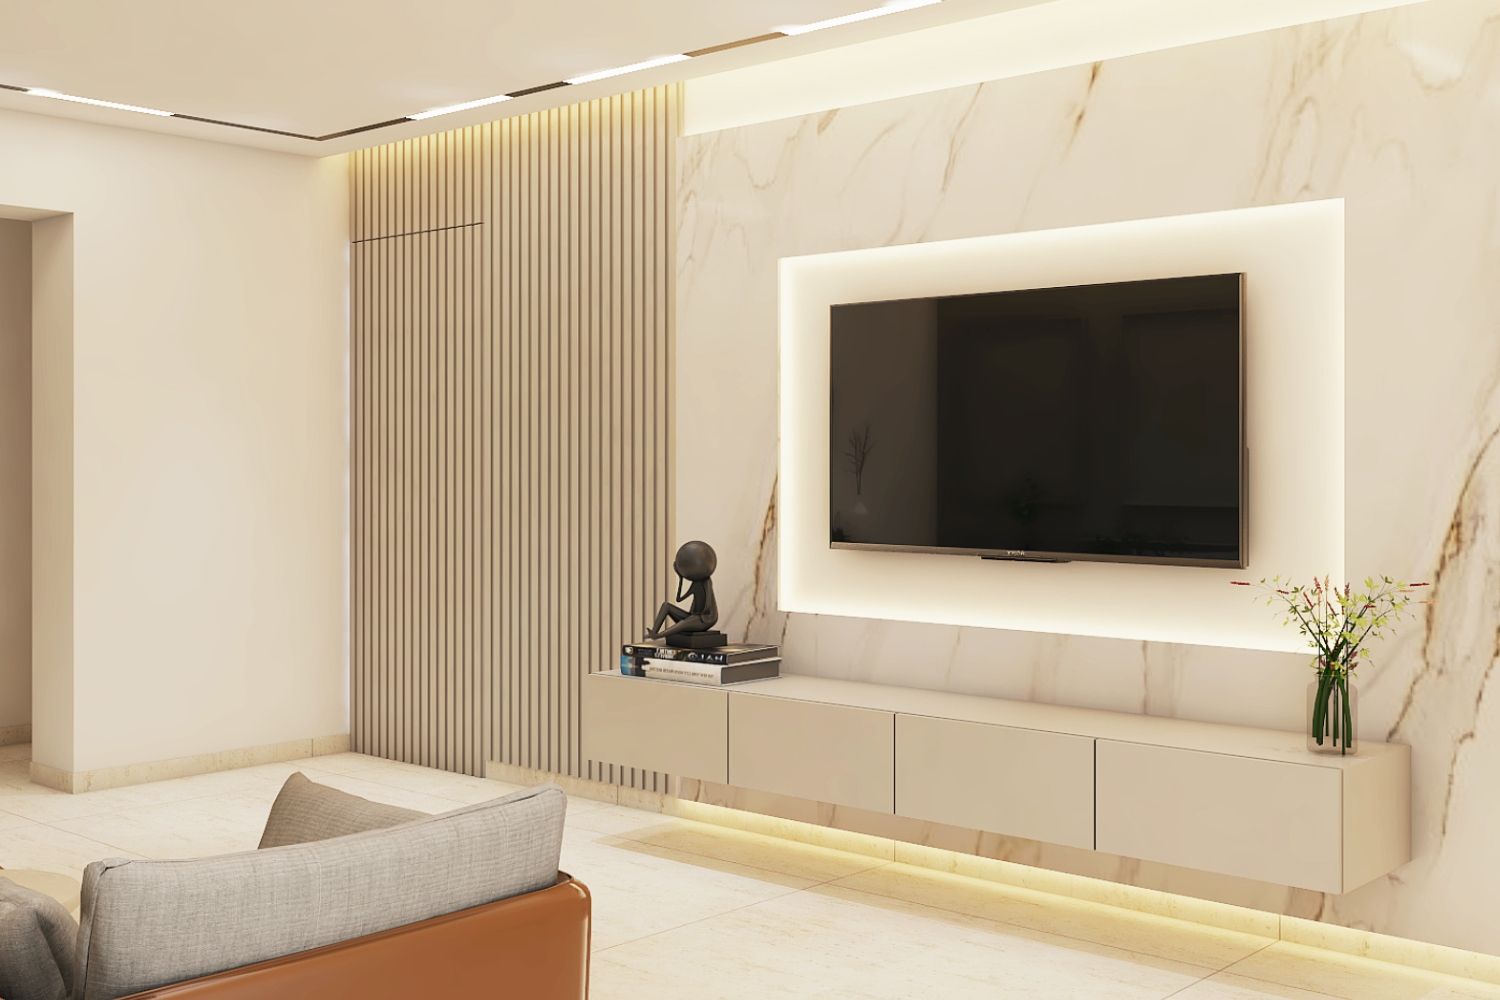 Contemporary Cream-Toned Wall-Mounted TV Cabinet Design With Marble Back Panel And Grooves